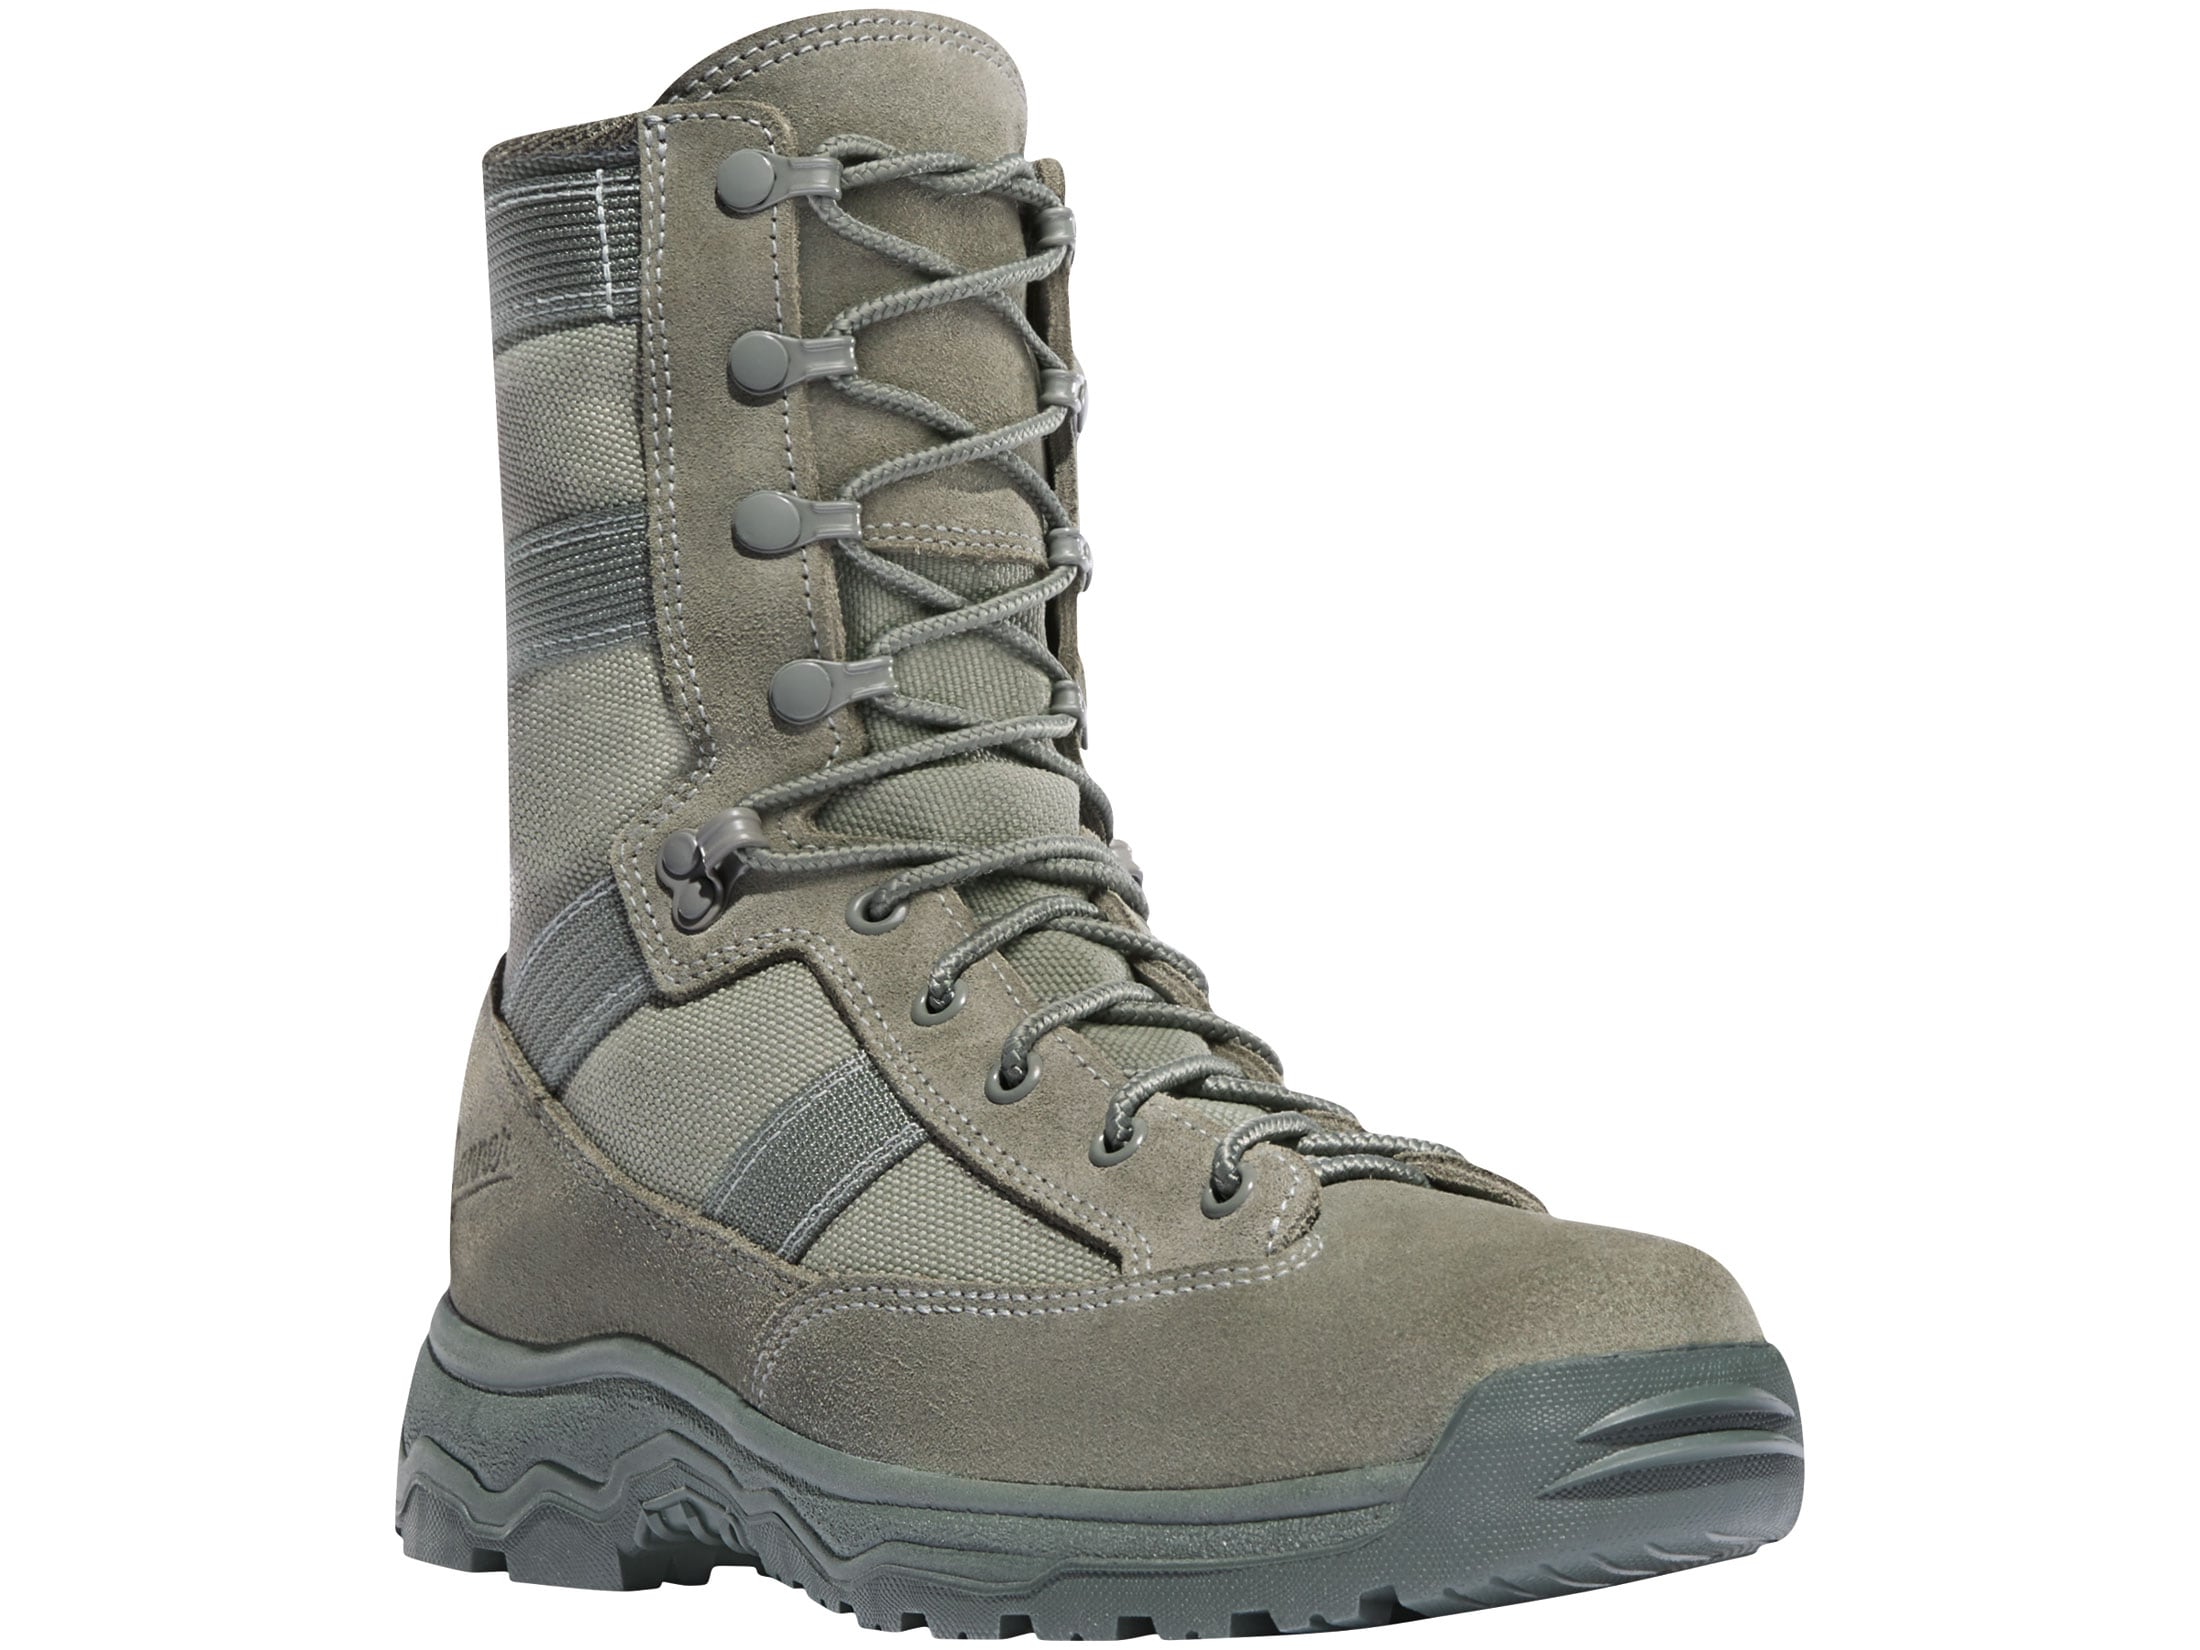 Danner Reckoning 8 Tactical Boots Leather/Nylon Sage Green Men's 13 D